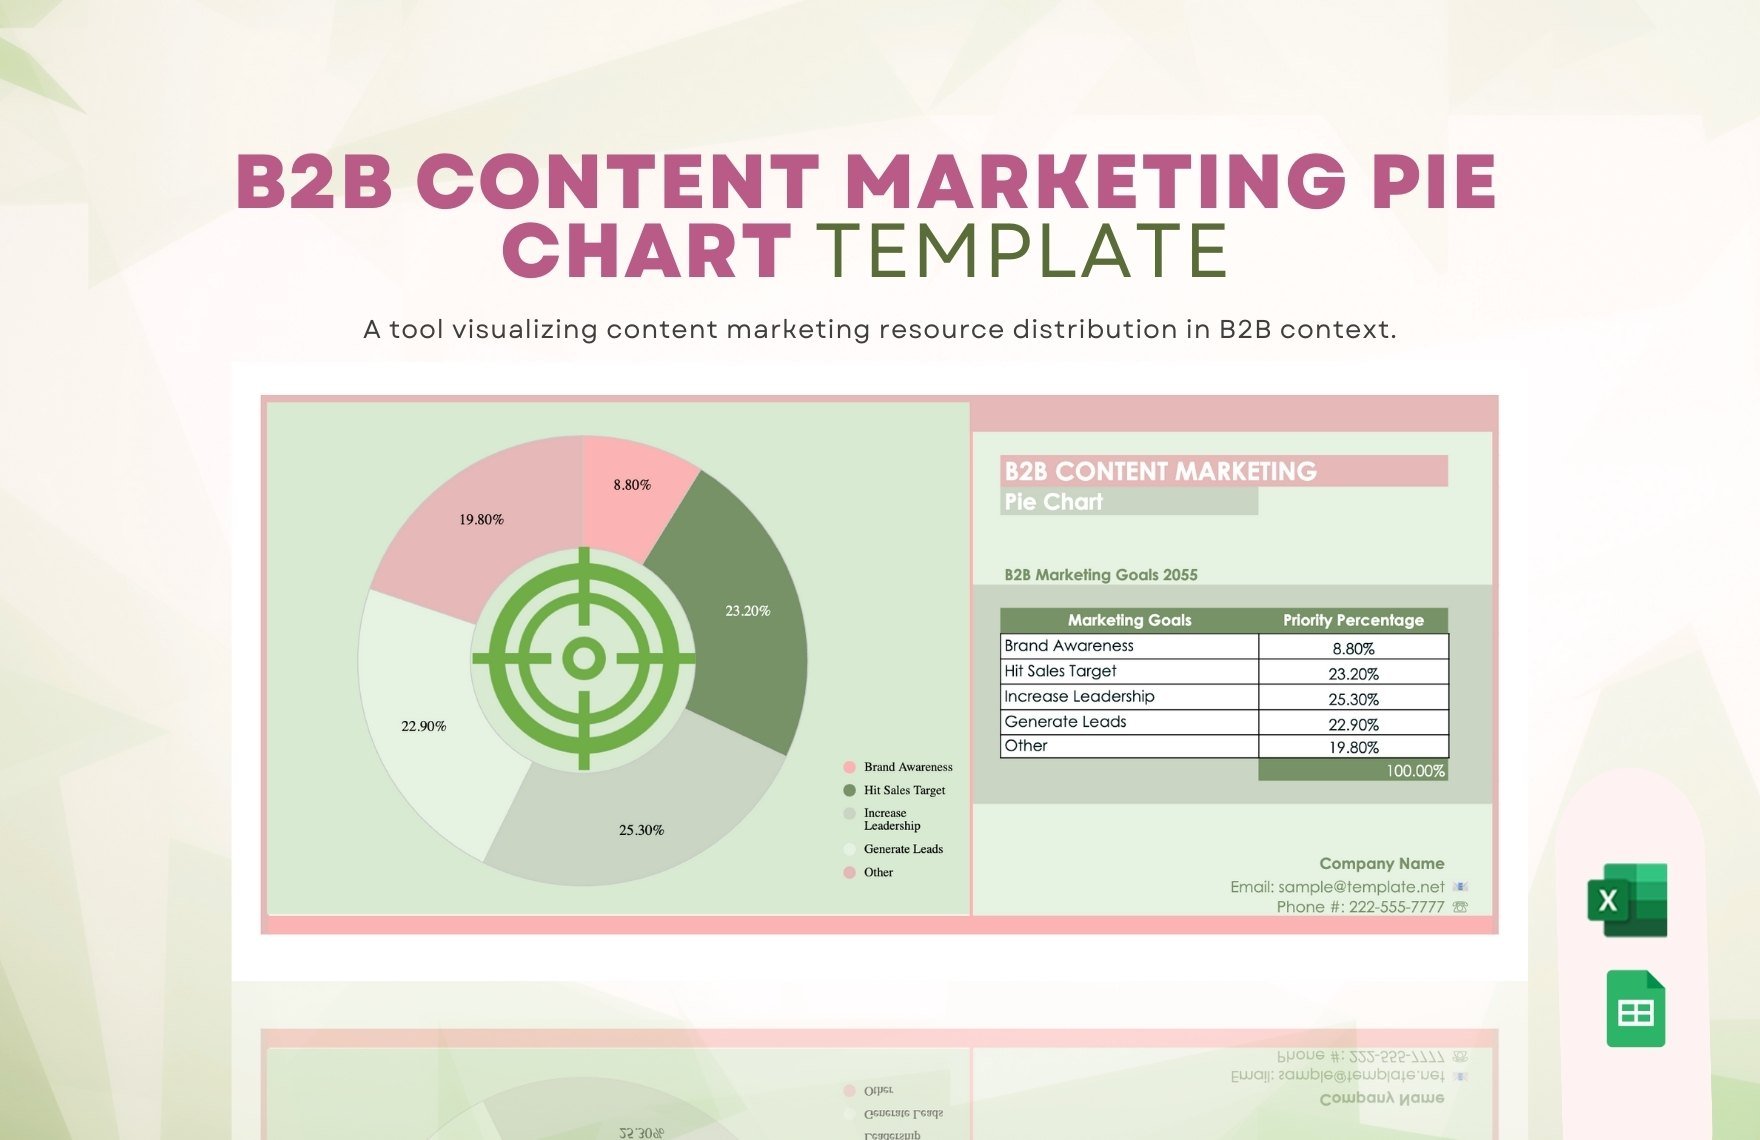 B2B Content Marketing Pie Chart in Excel, Google Sheets